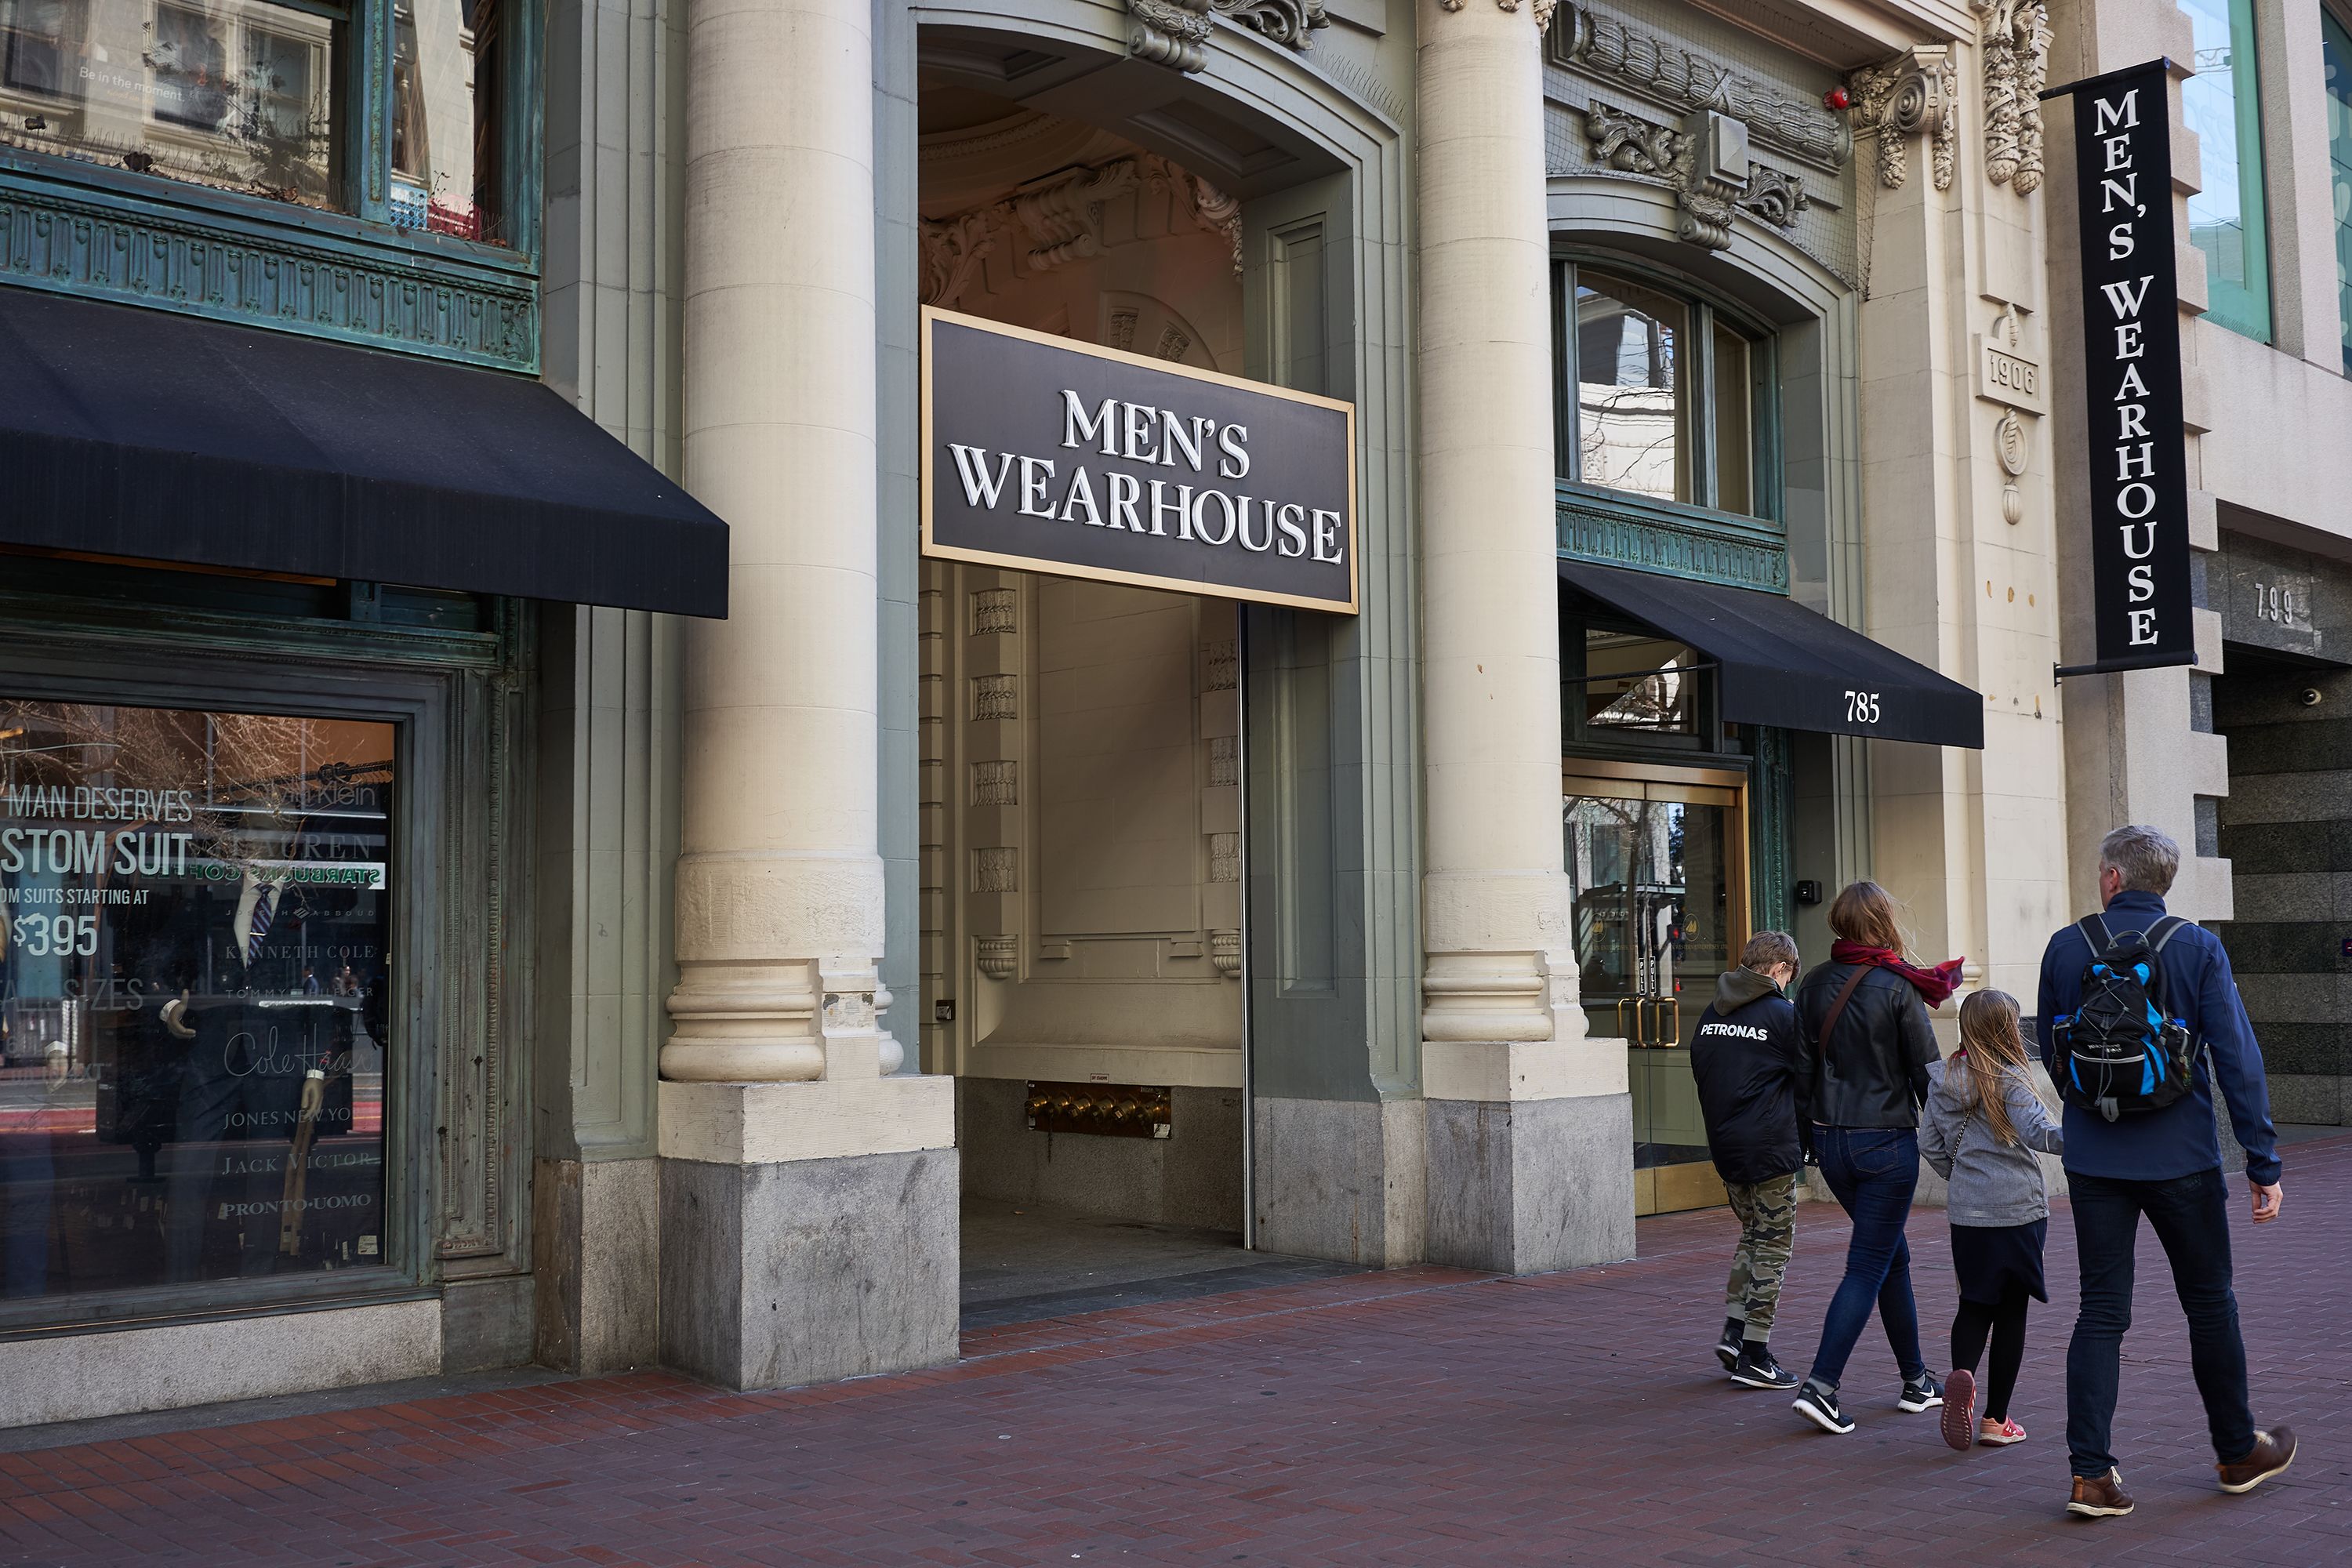 Neiman Marcus CEO reacts to surge in retail crime in major cities